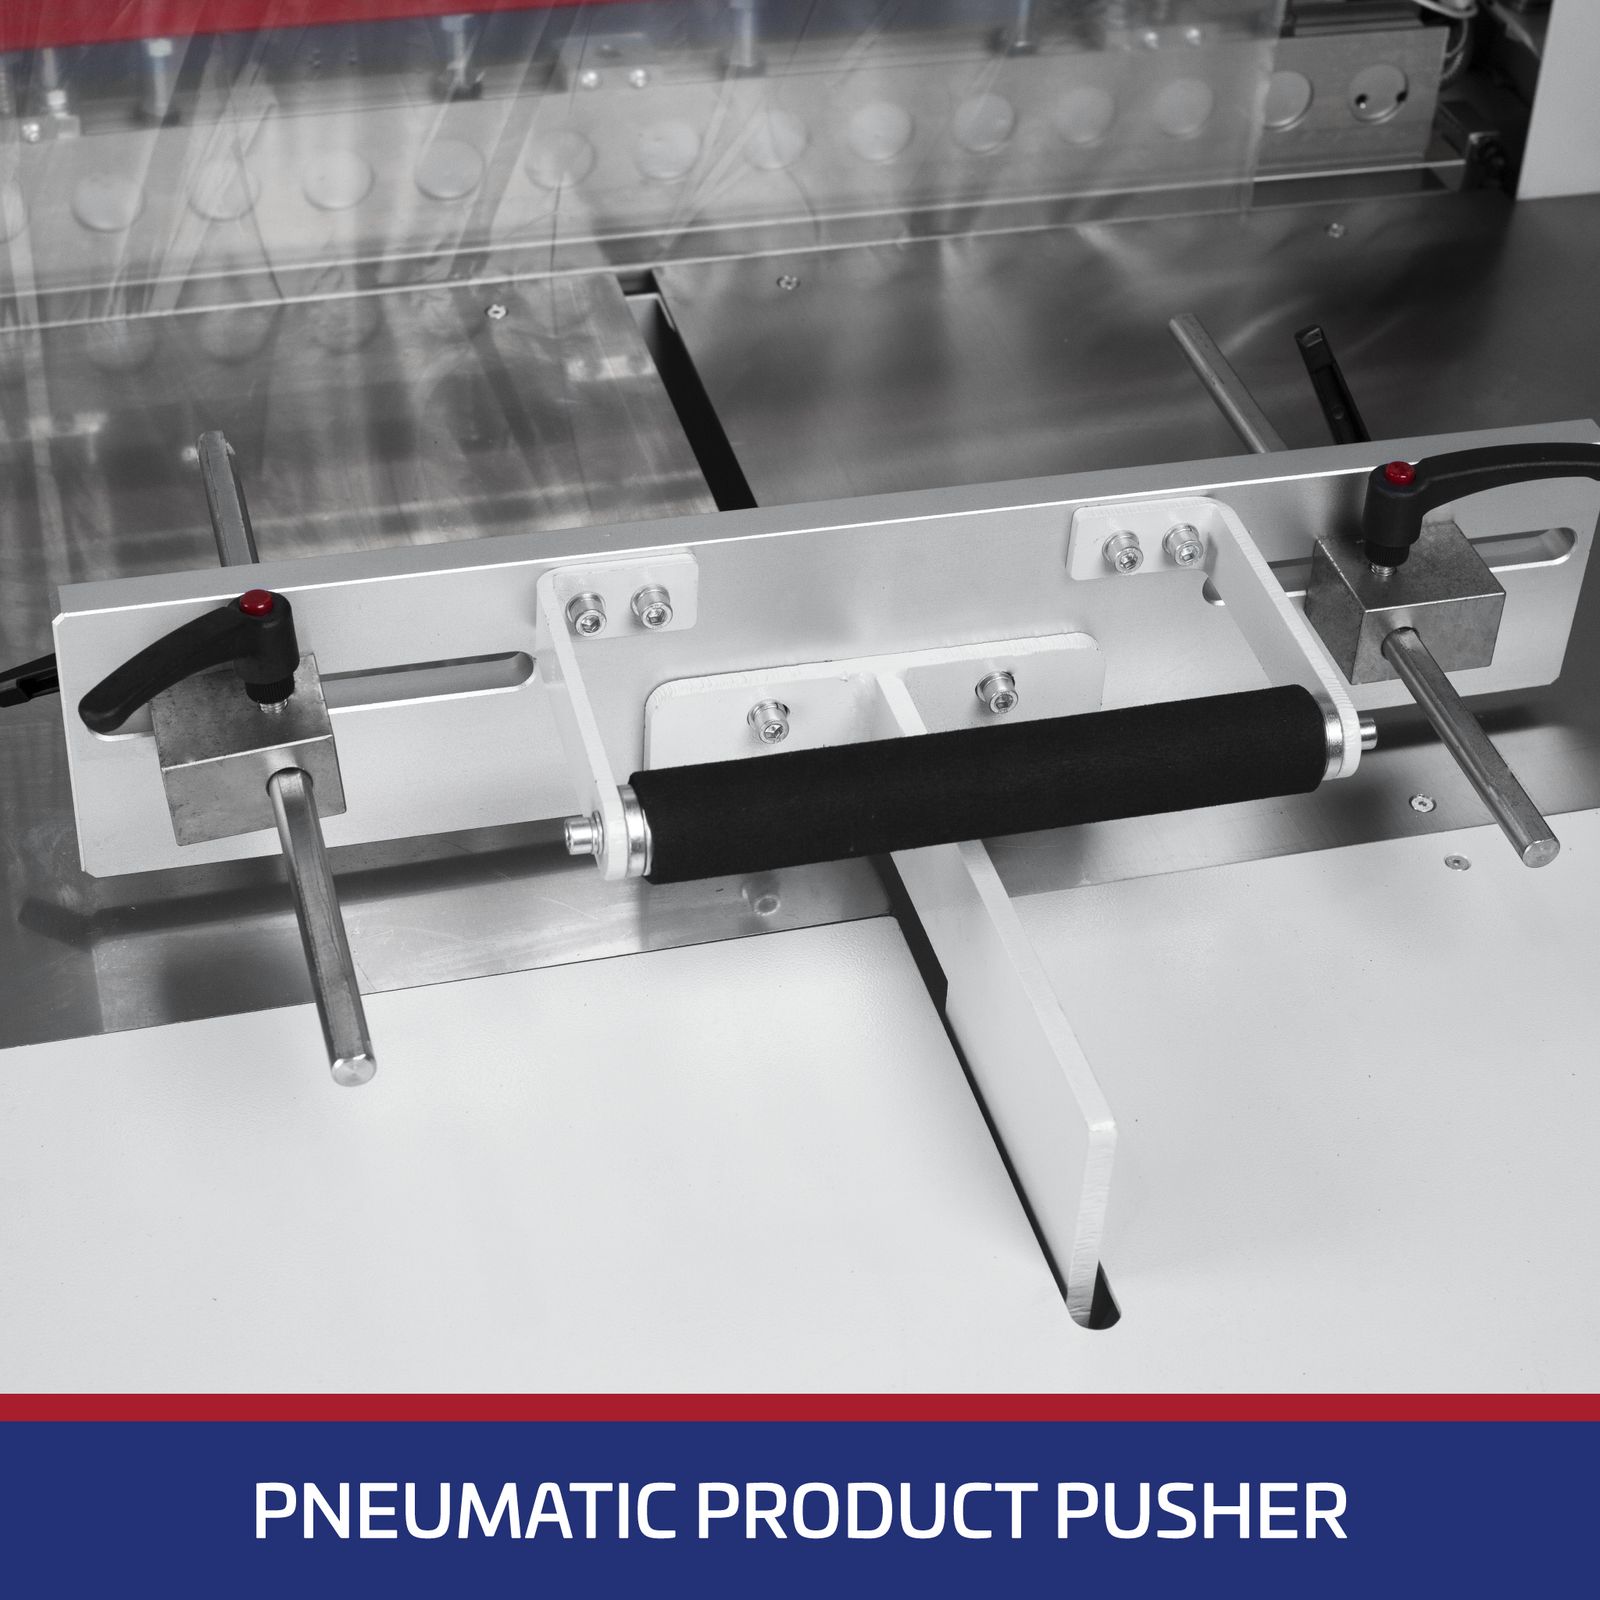 Close-up of the pneumatic product pusher